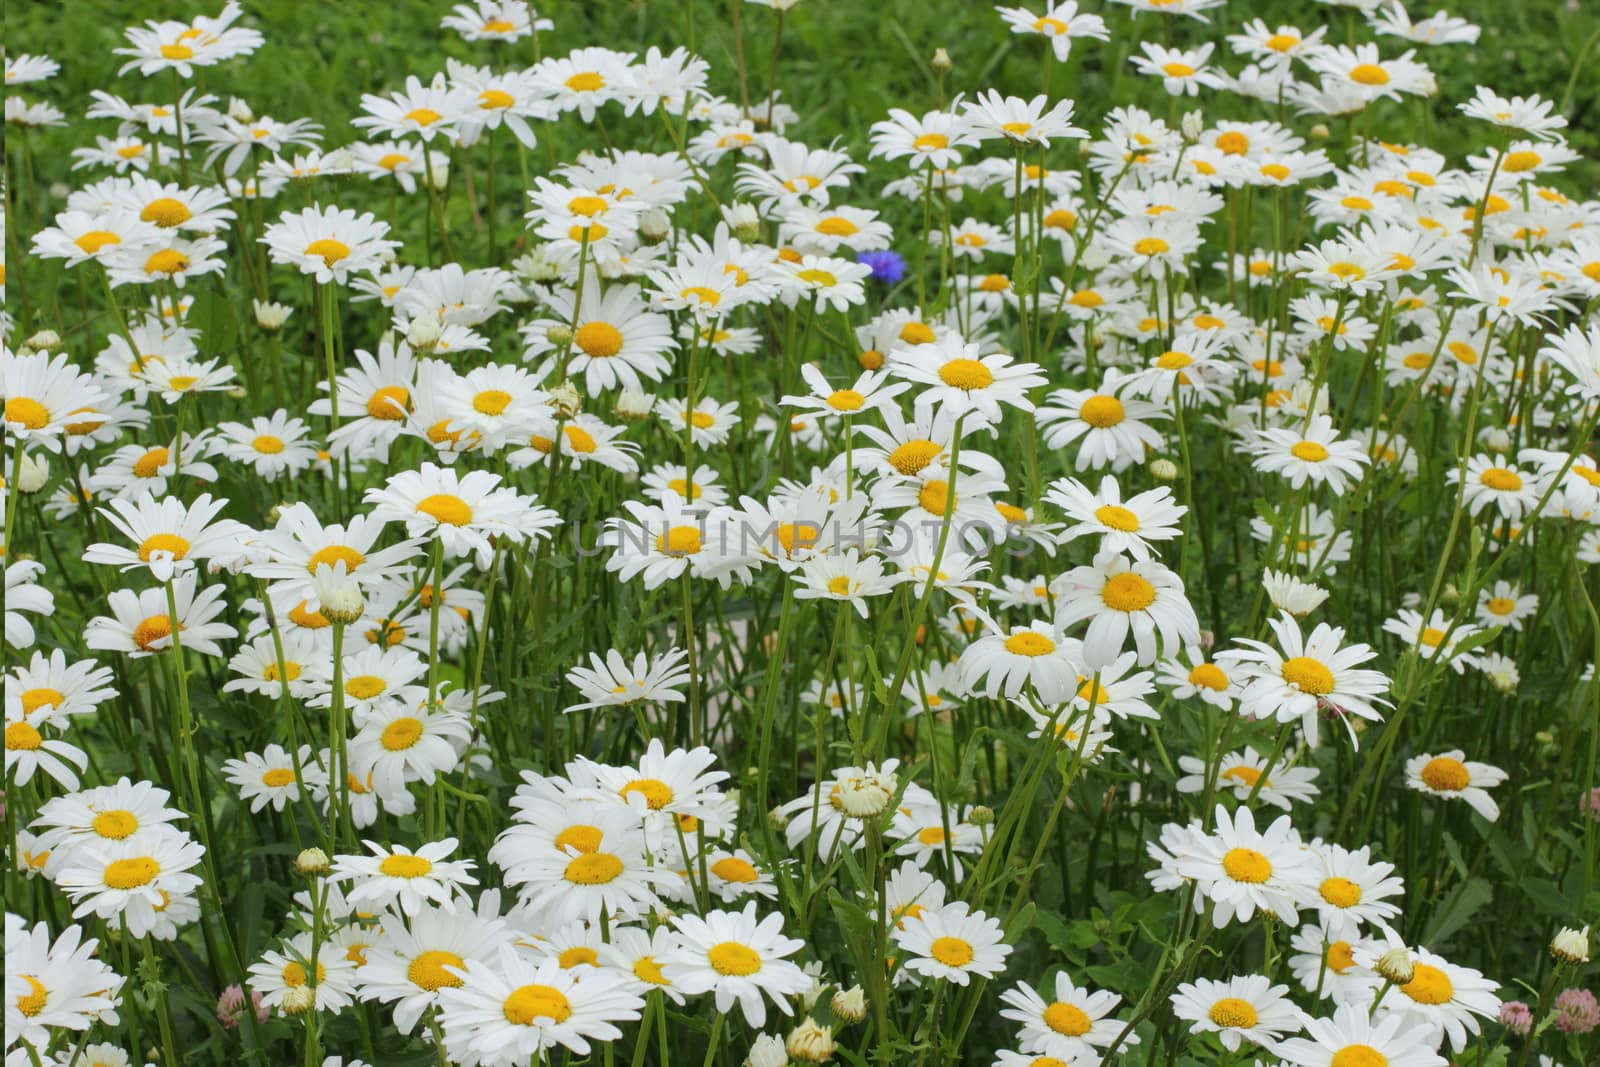 Many daisies in the garden by Metanna